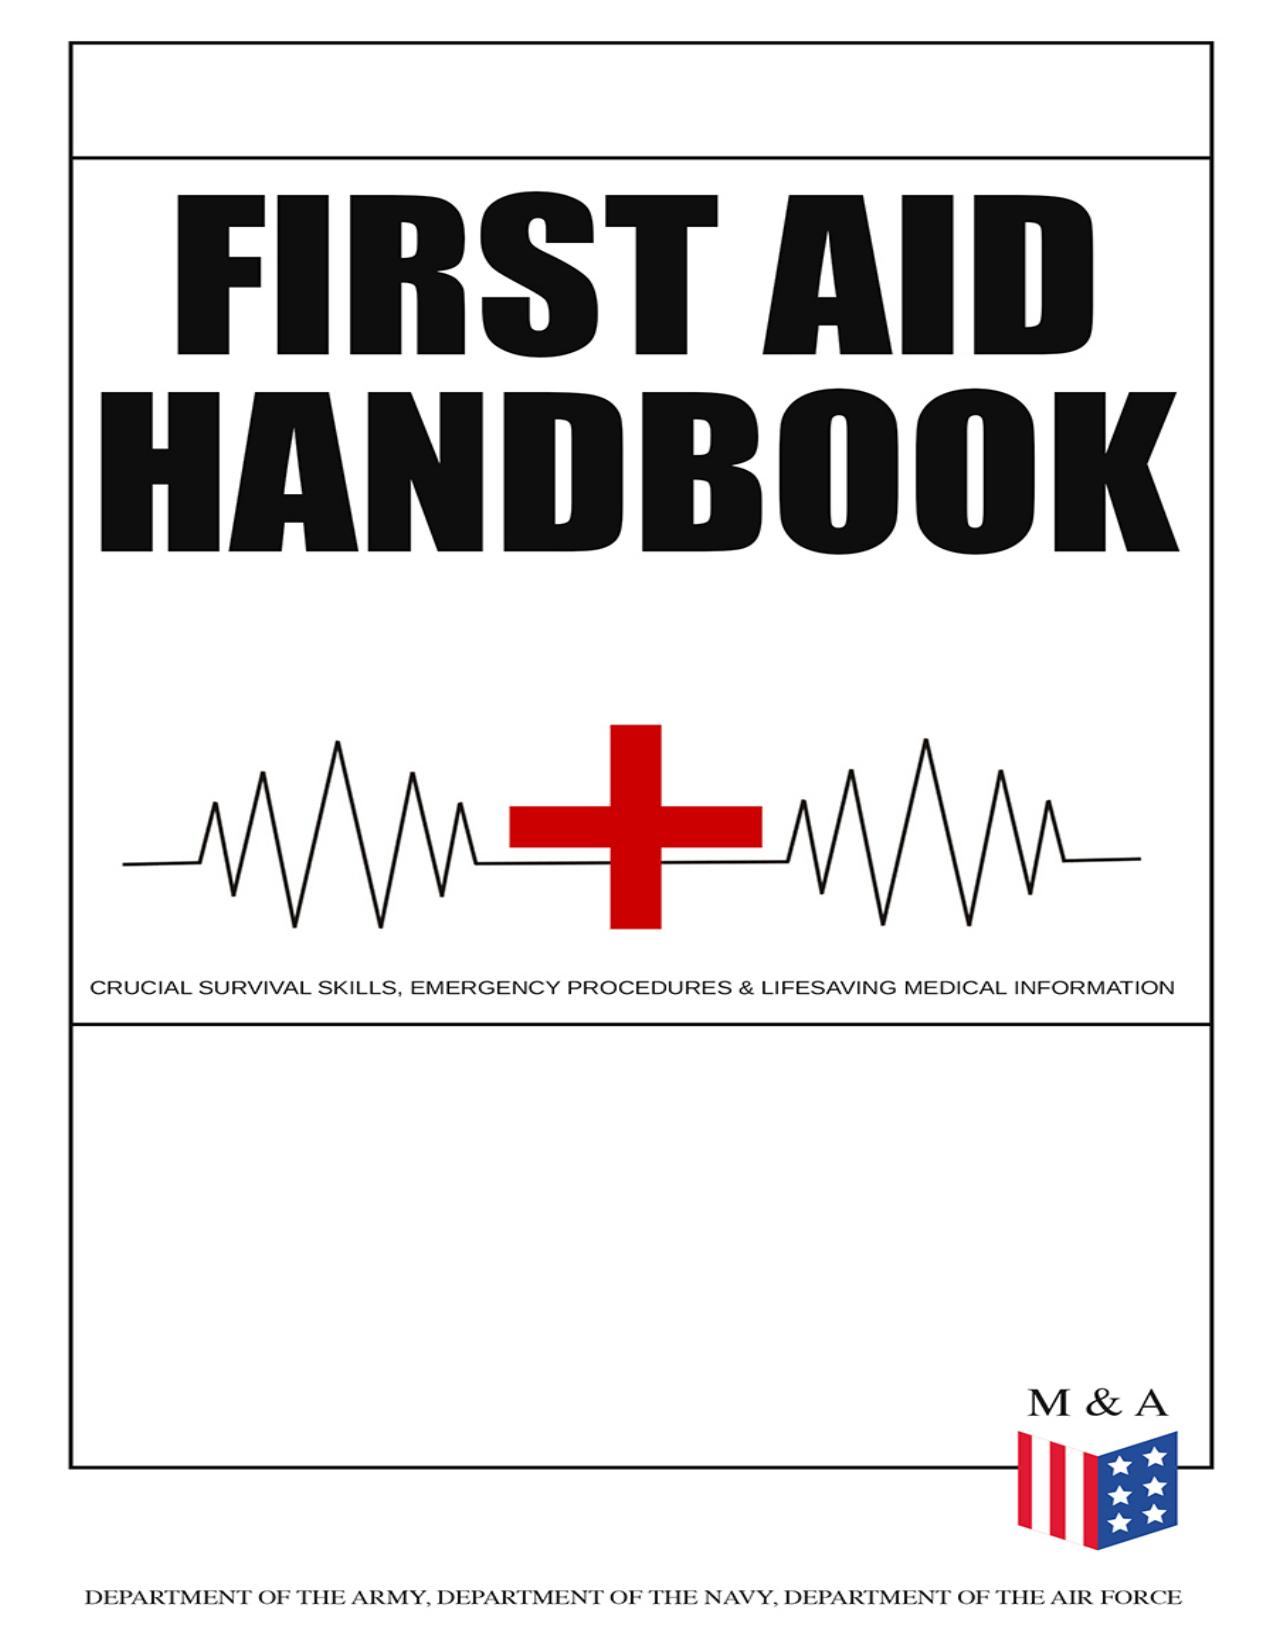 First Aid Handbook--Crucial Survival Skills, Emergency Procedures & Lifesaving Medical Information by Department of the Army